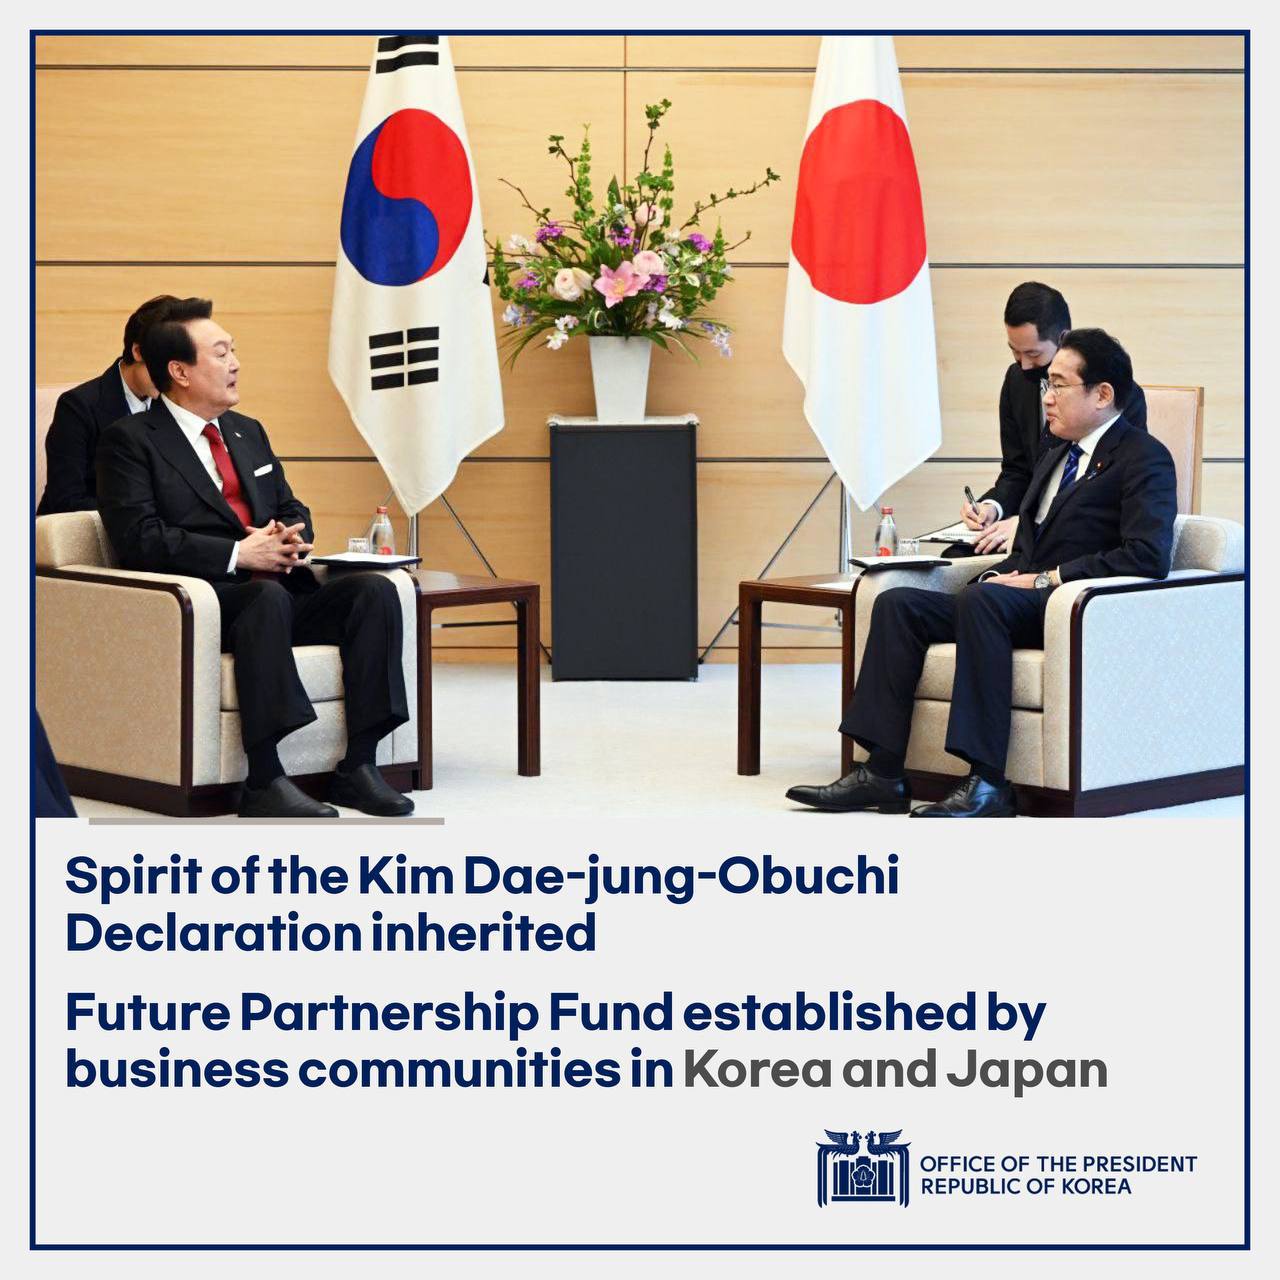 Two-day Visit to Japan, Korea's Closest Neighbor, Brings Cooperation for the Economy, Security and Future Generations Slide4